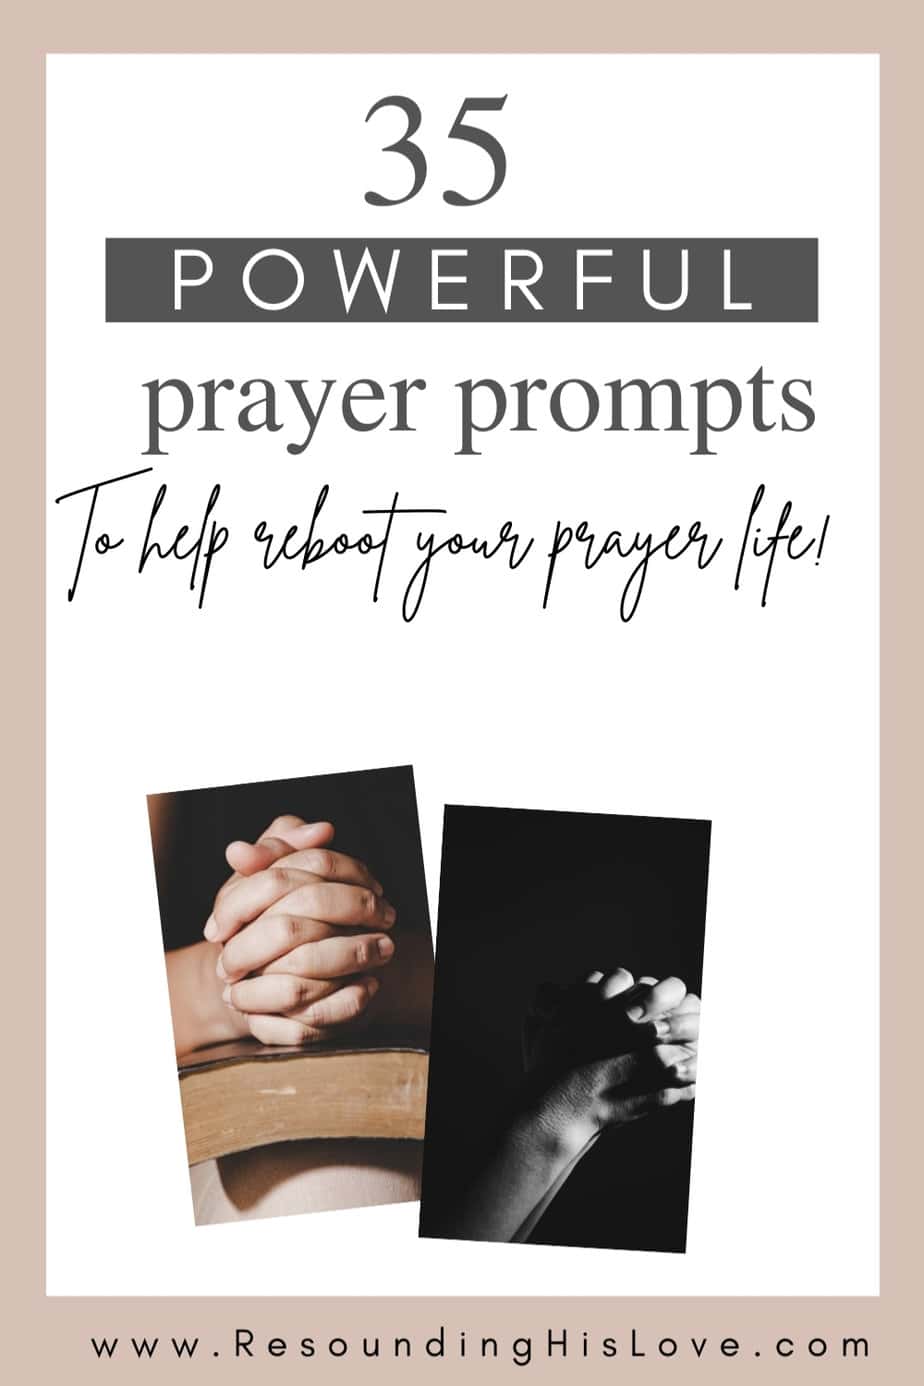 Reboot Your Prayer Life? Here Are 35 Easy Tips To Start With